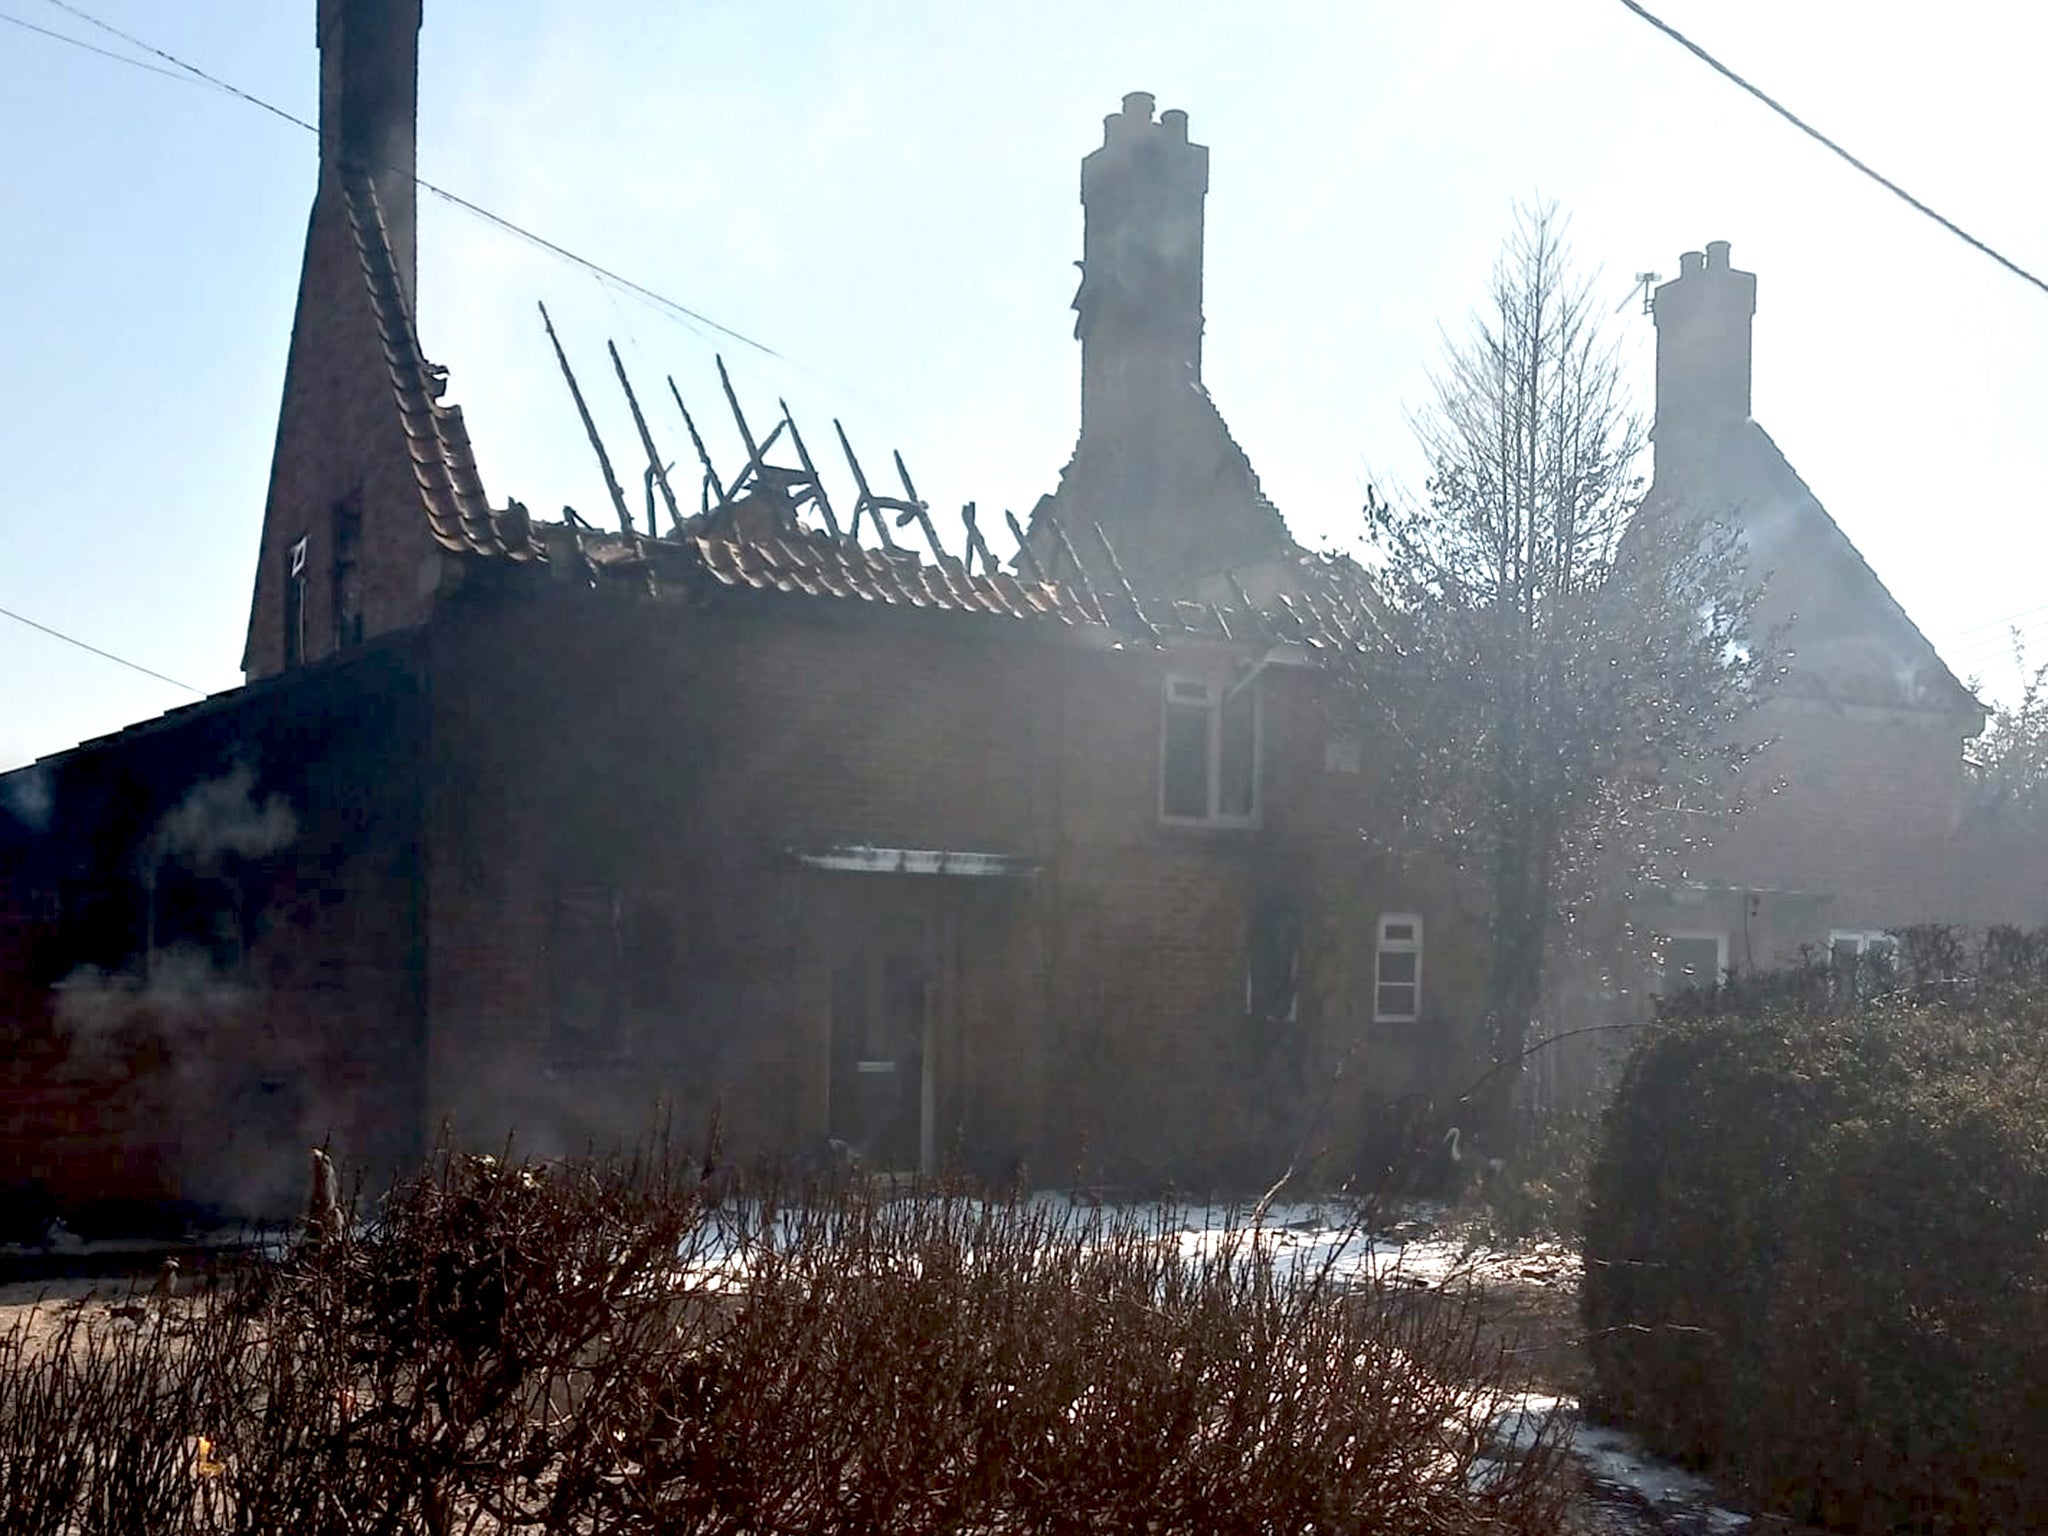 David Calver’s house went up in flames during the extreme heat on Tuesday